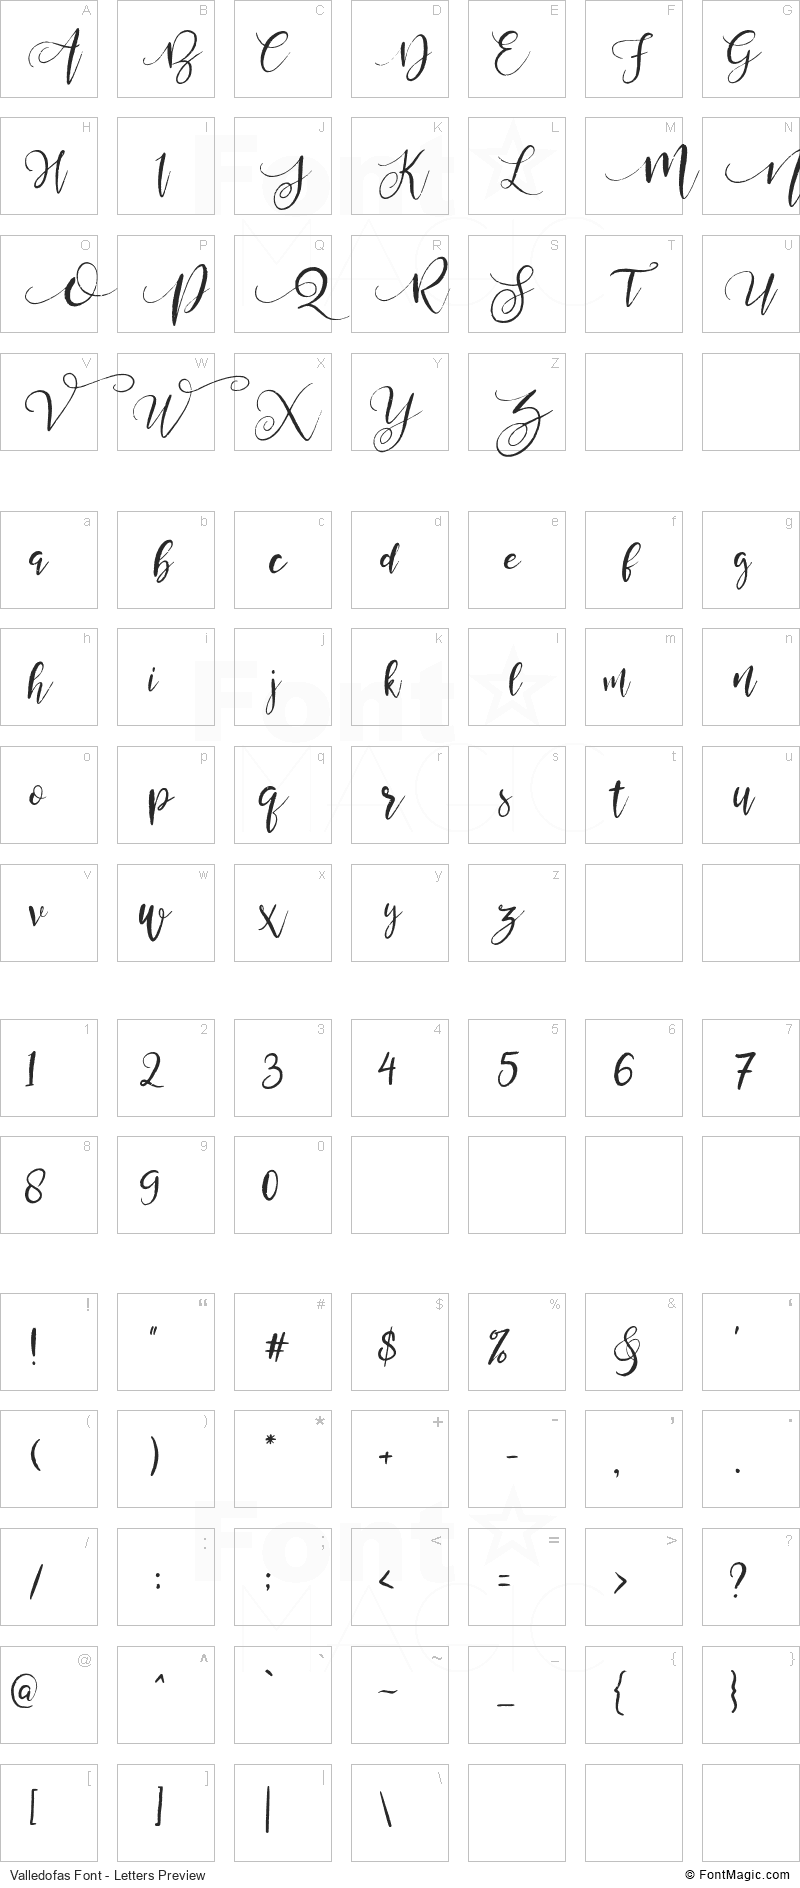 Valledofas Font - All Latters Preview Chart